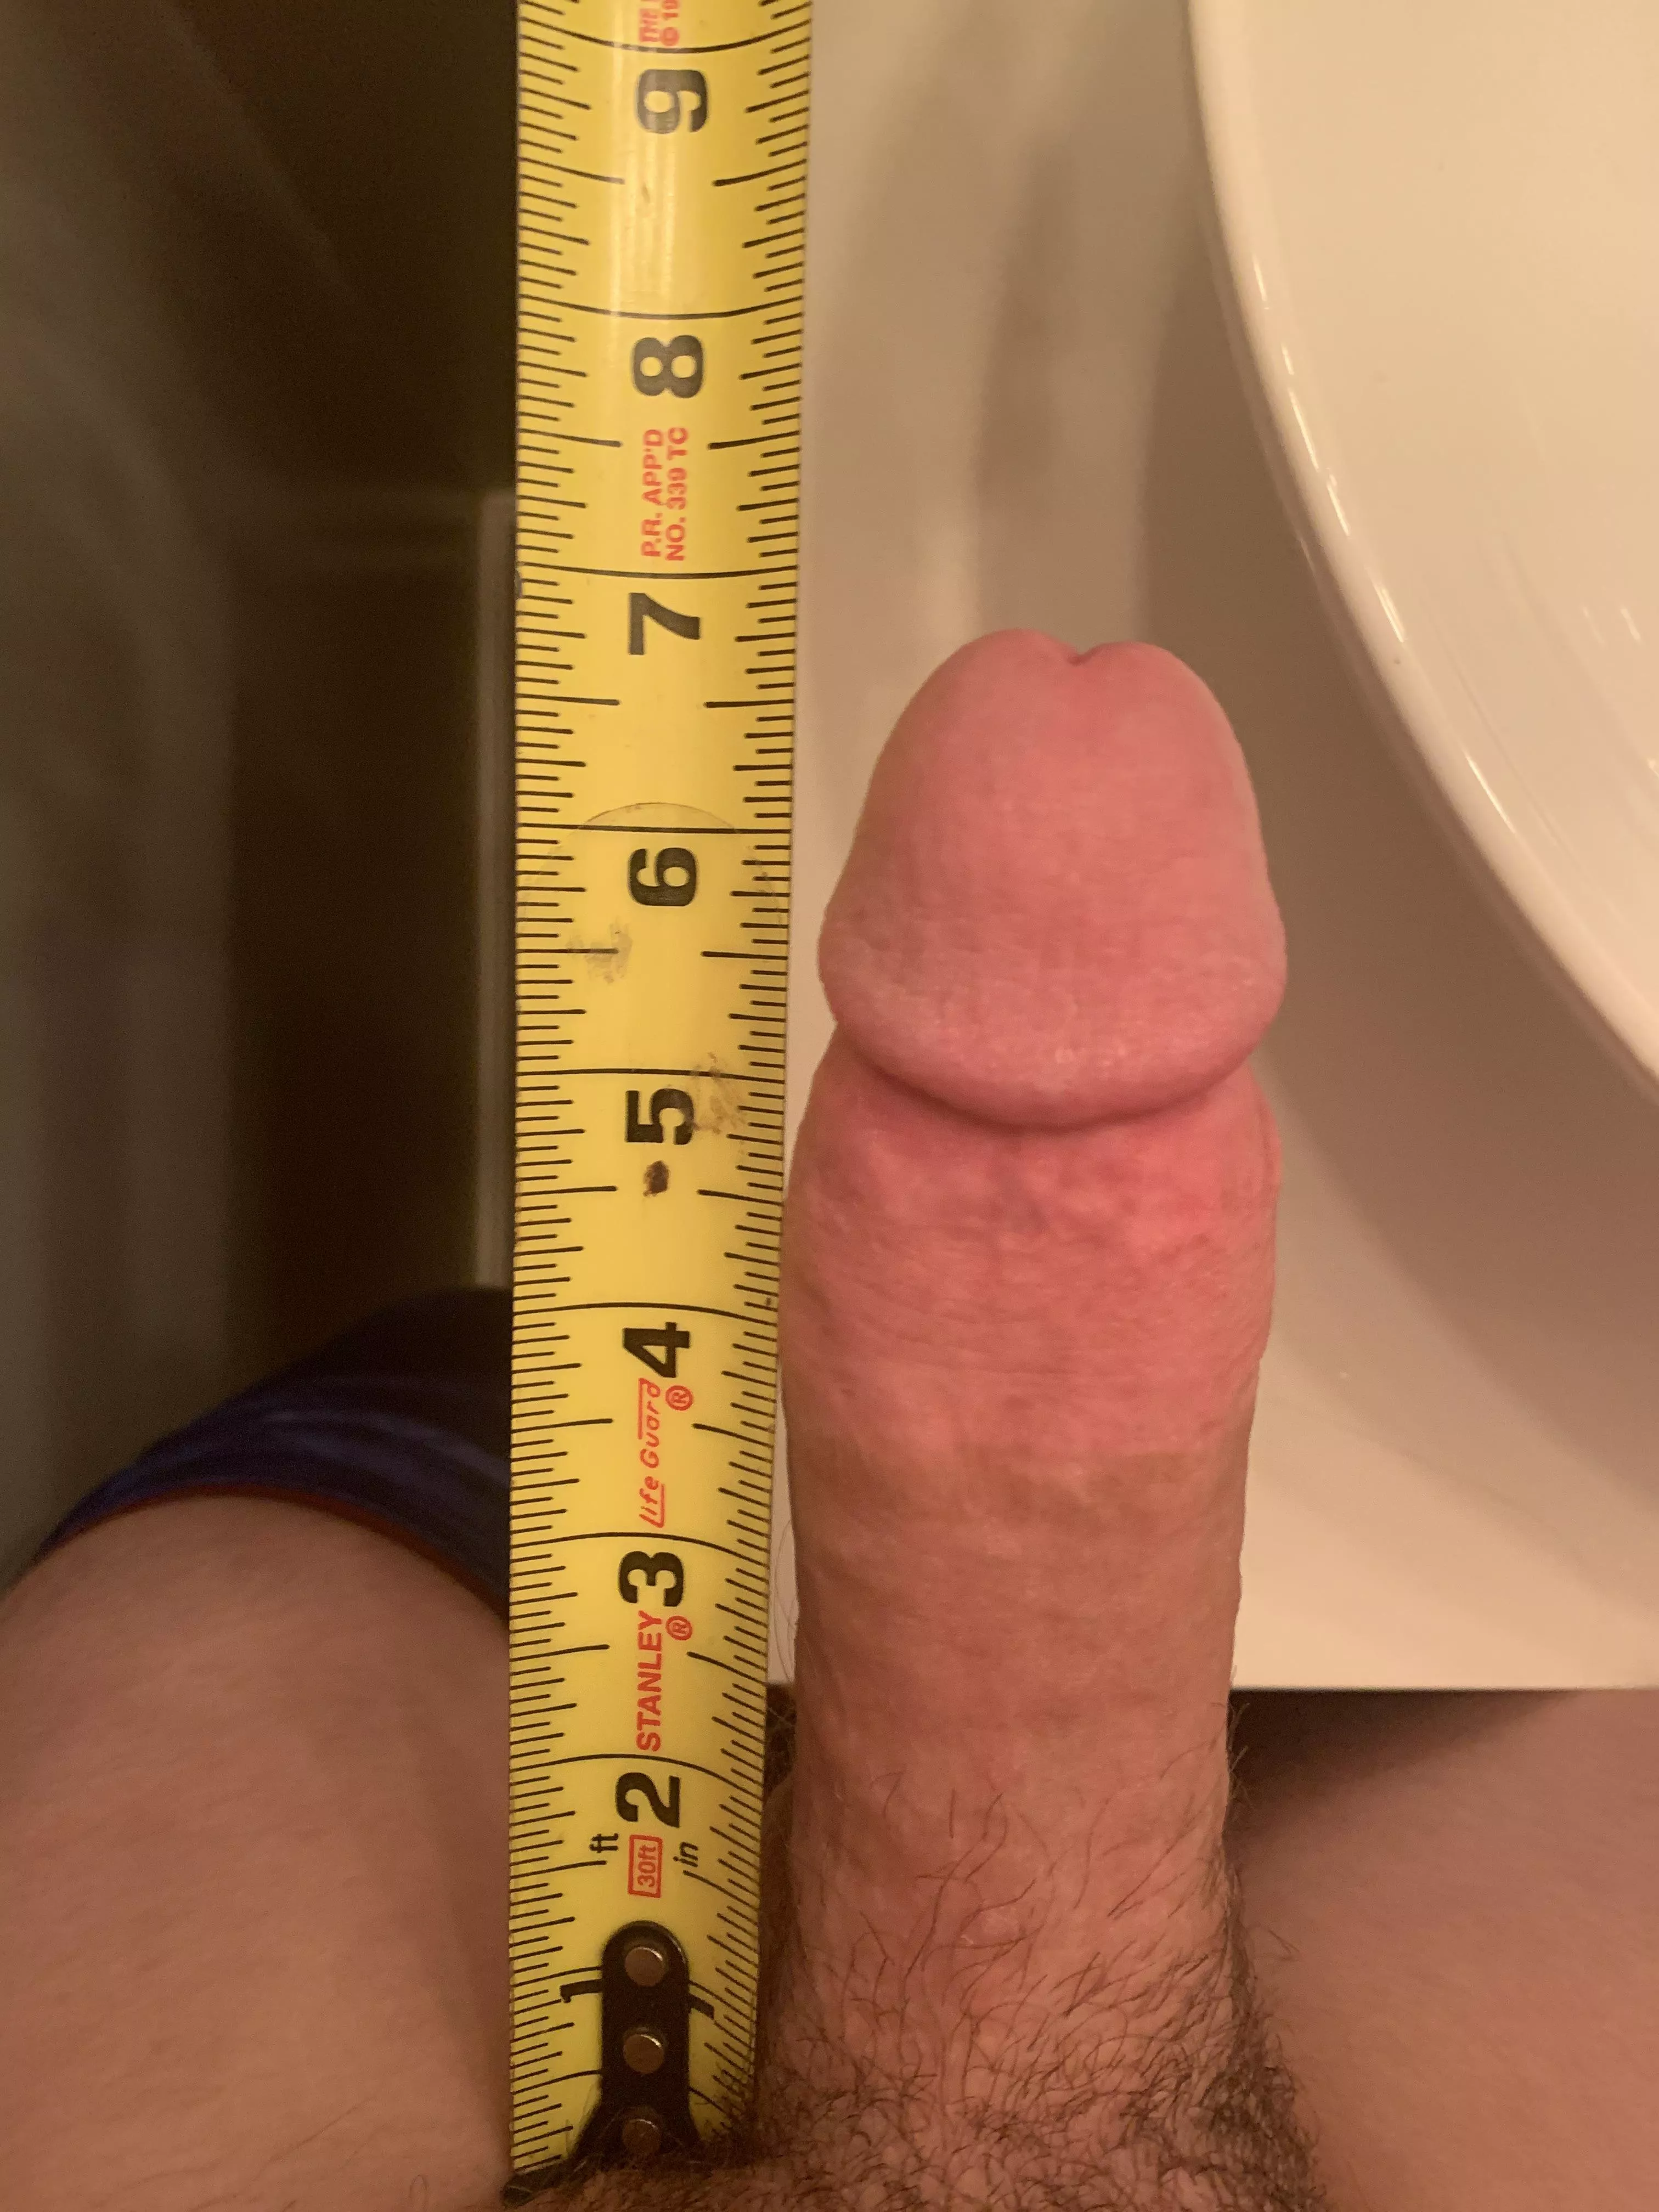 I have a 7 inch dick